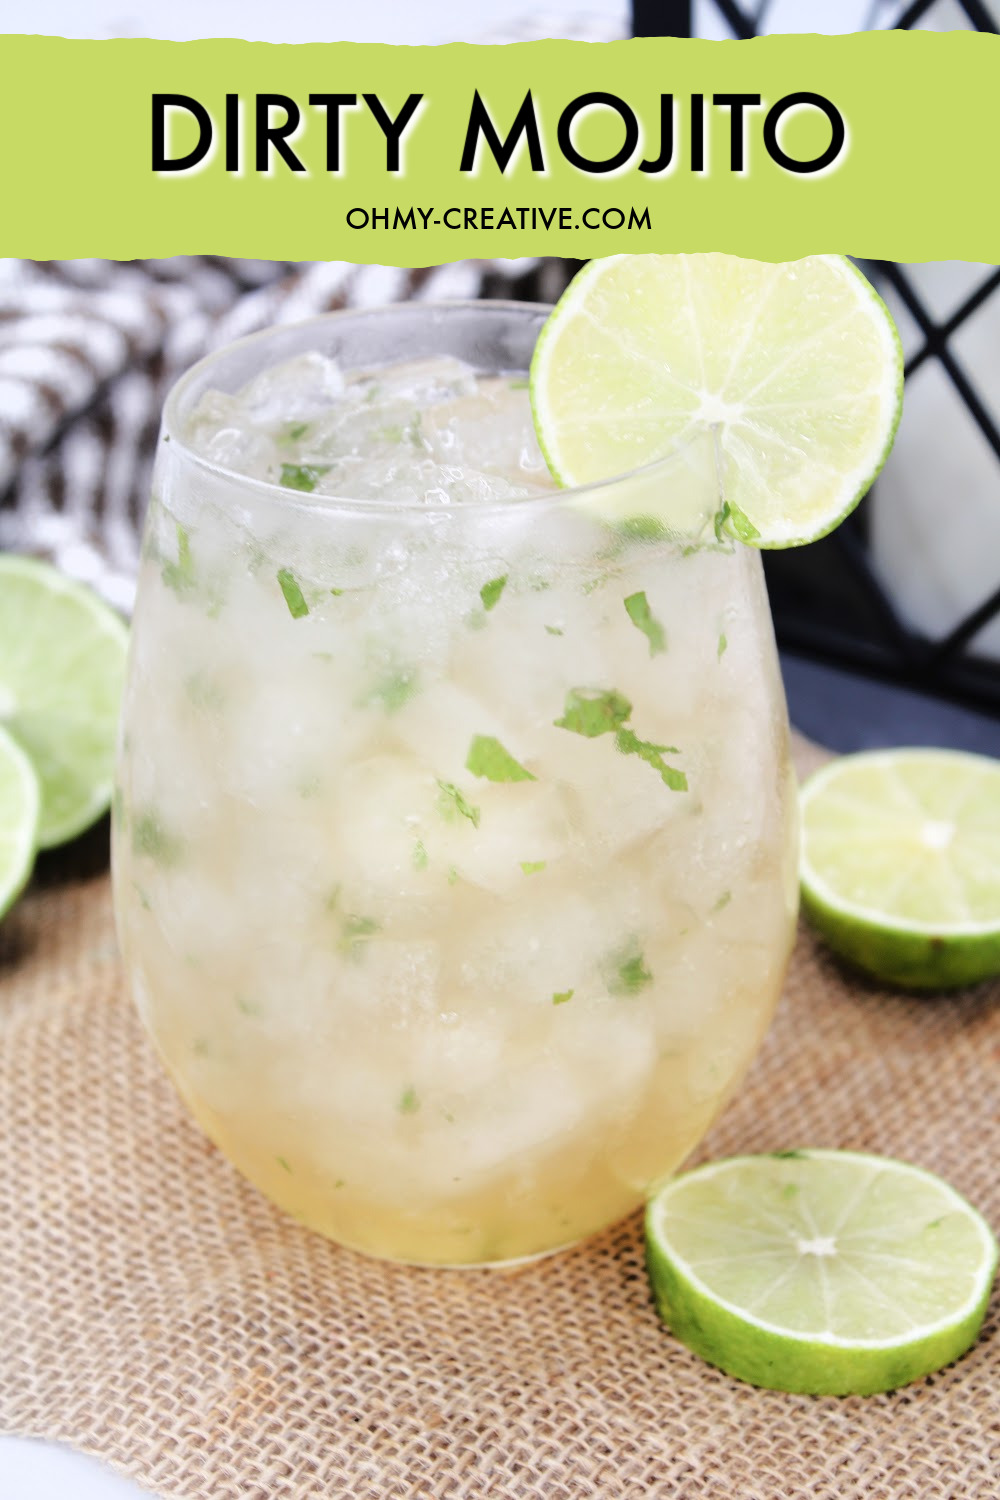 This dirty mojito cocktail is sitting on a burlap background with a black and white checked napkin and a black summer lantern. Garnished include slices of lime.